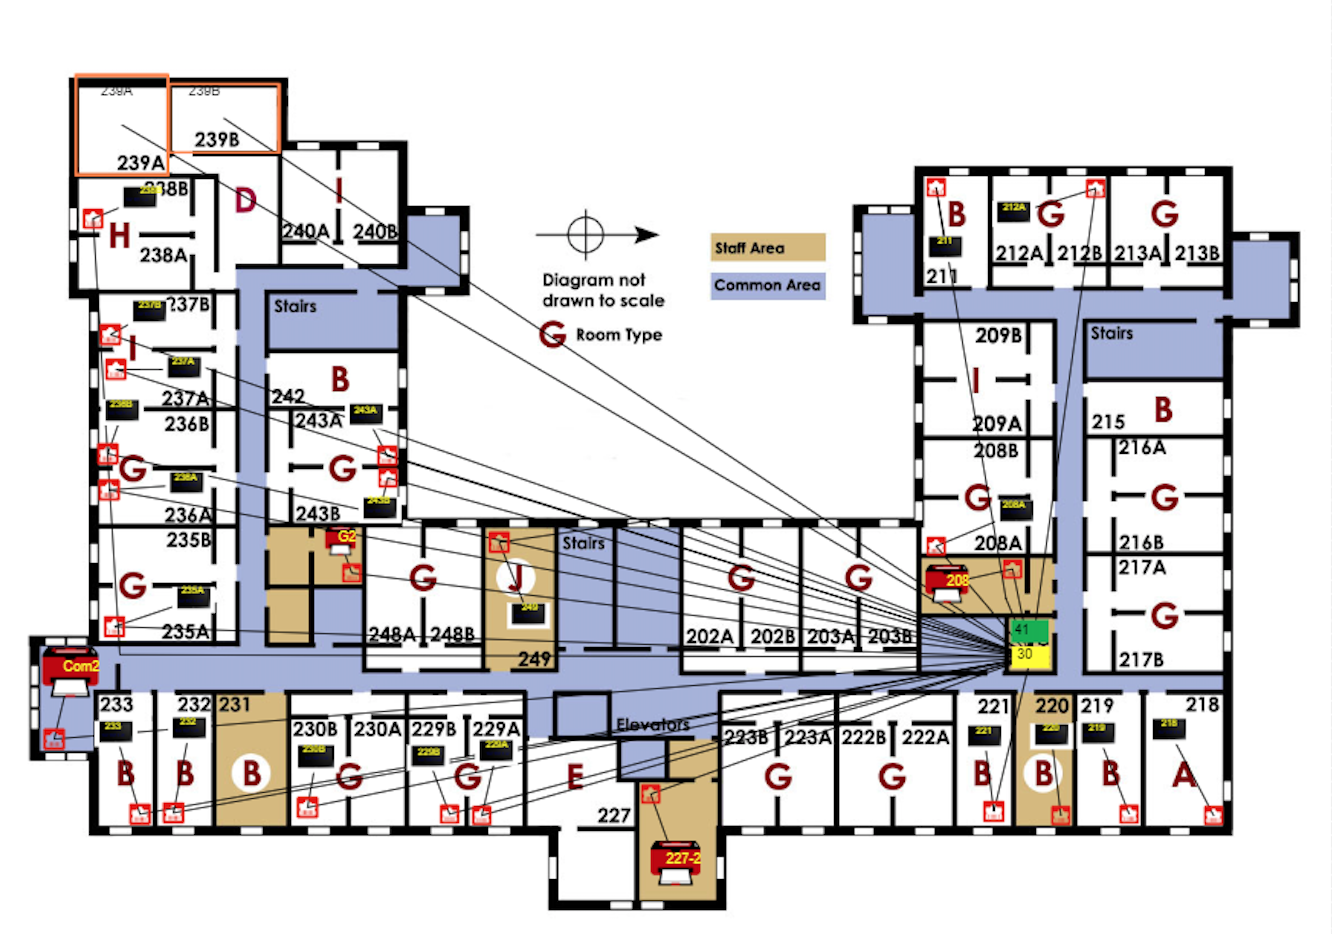 Office Floor Plan Layout And Network Cabling ~ Conceptdraw Networking ...